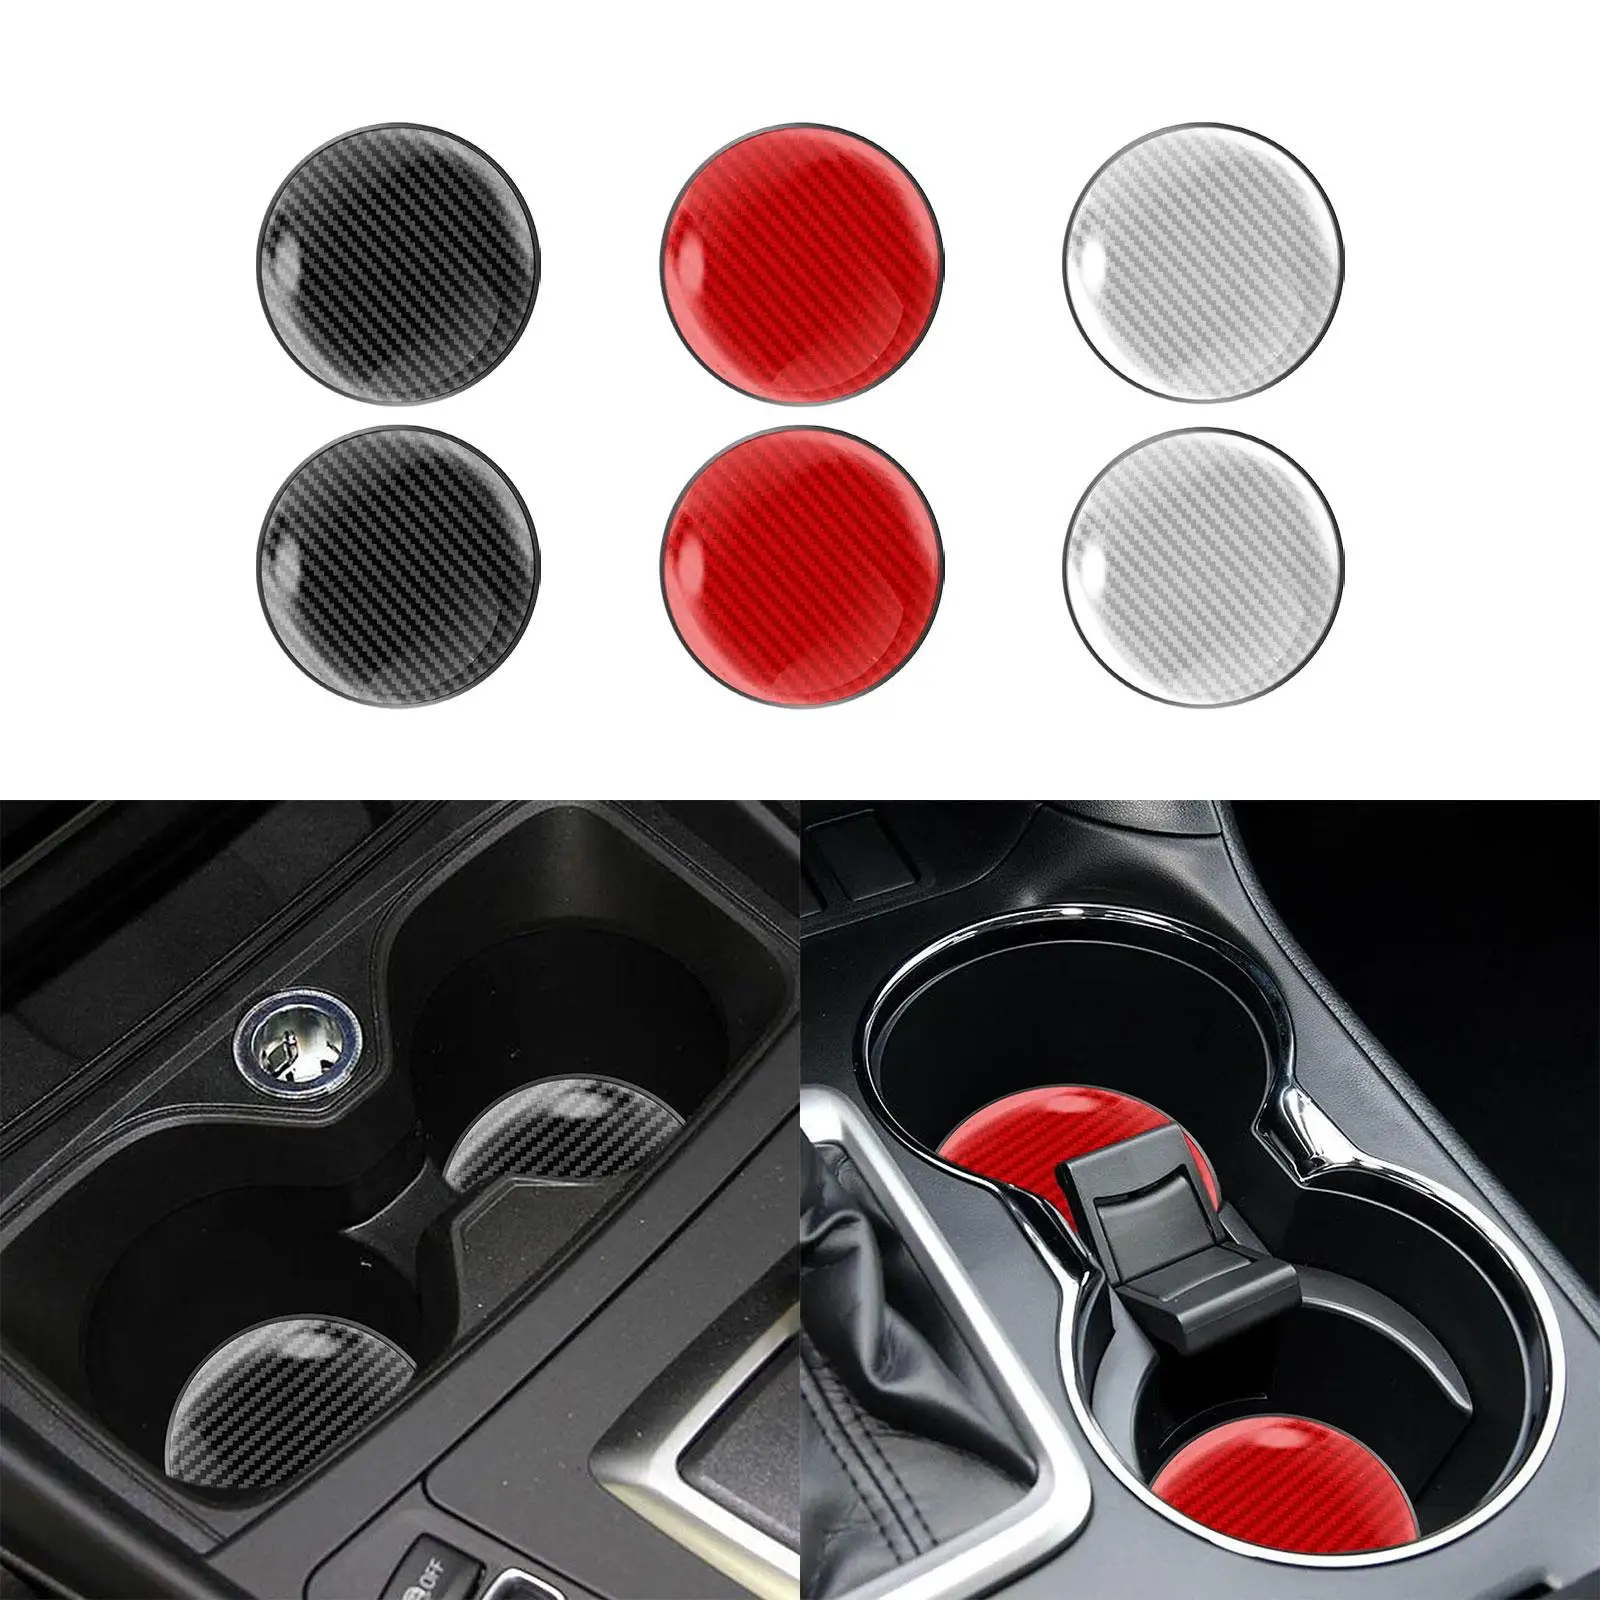 2 Pieces Cup Holder Coaster Cup Holder Insert Coaster for Outdoor Driving